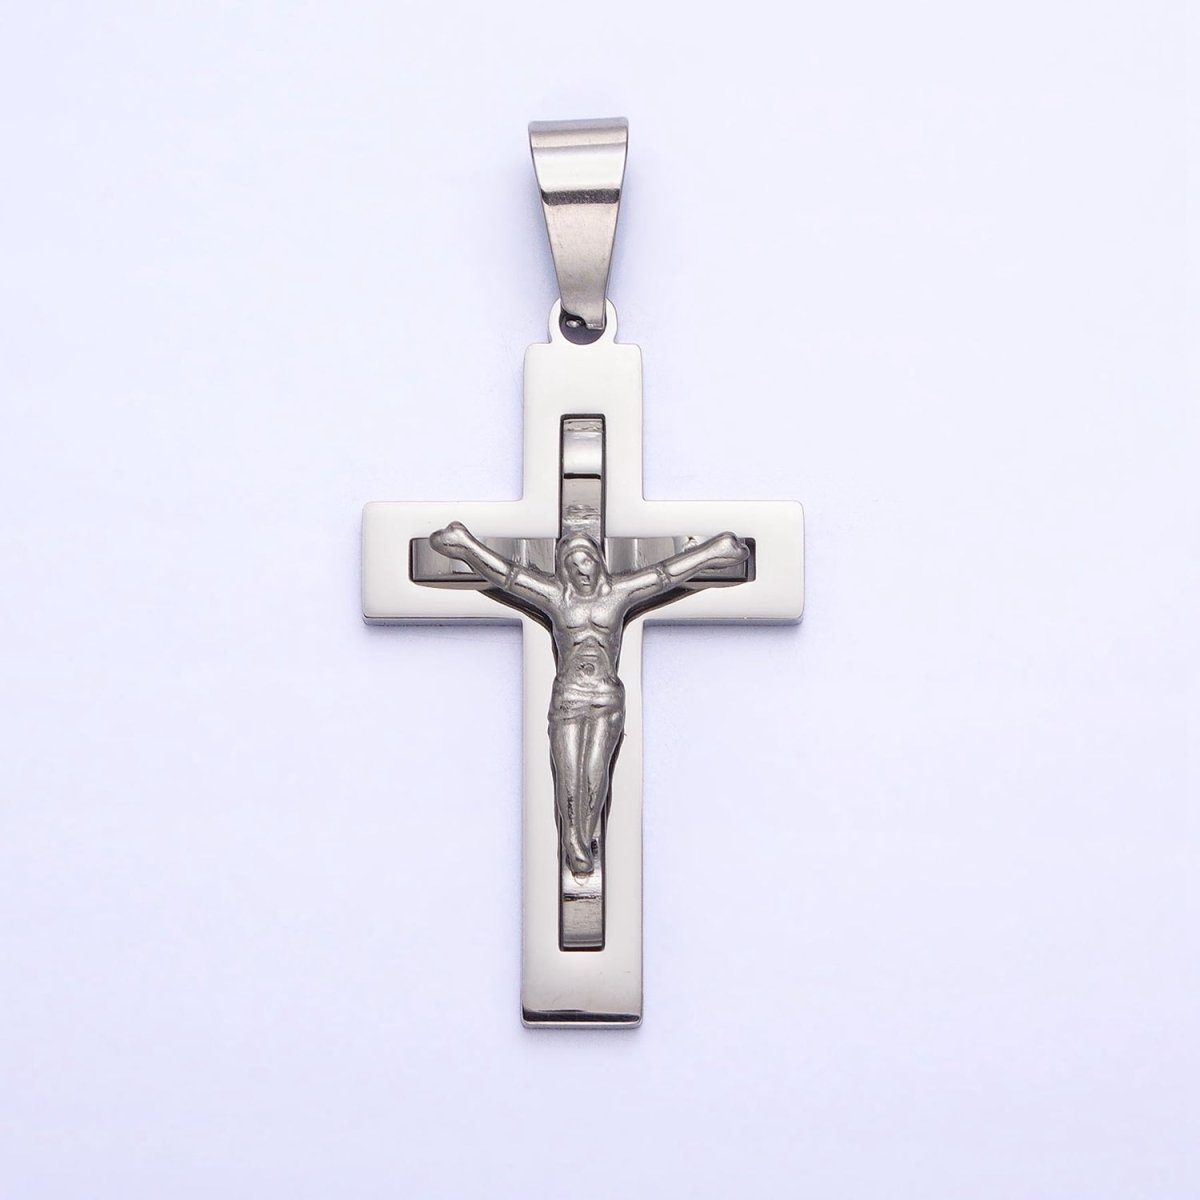 Stainless Steel Crucifix Cross Pendant in Gold Silver for Statement Religious Jewelry Making | P-1119 - DLUXCA